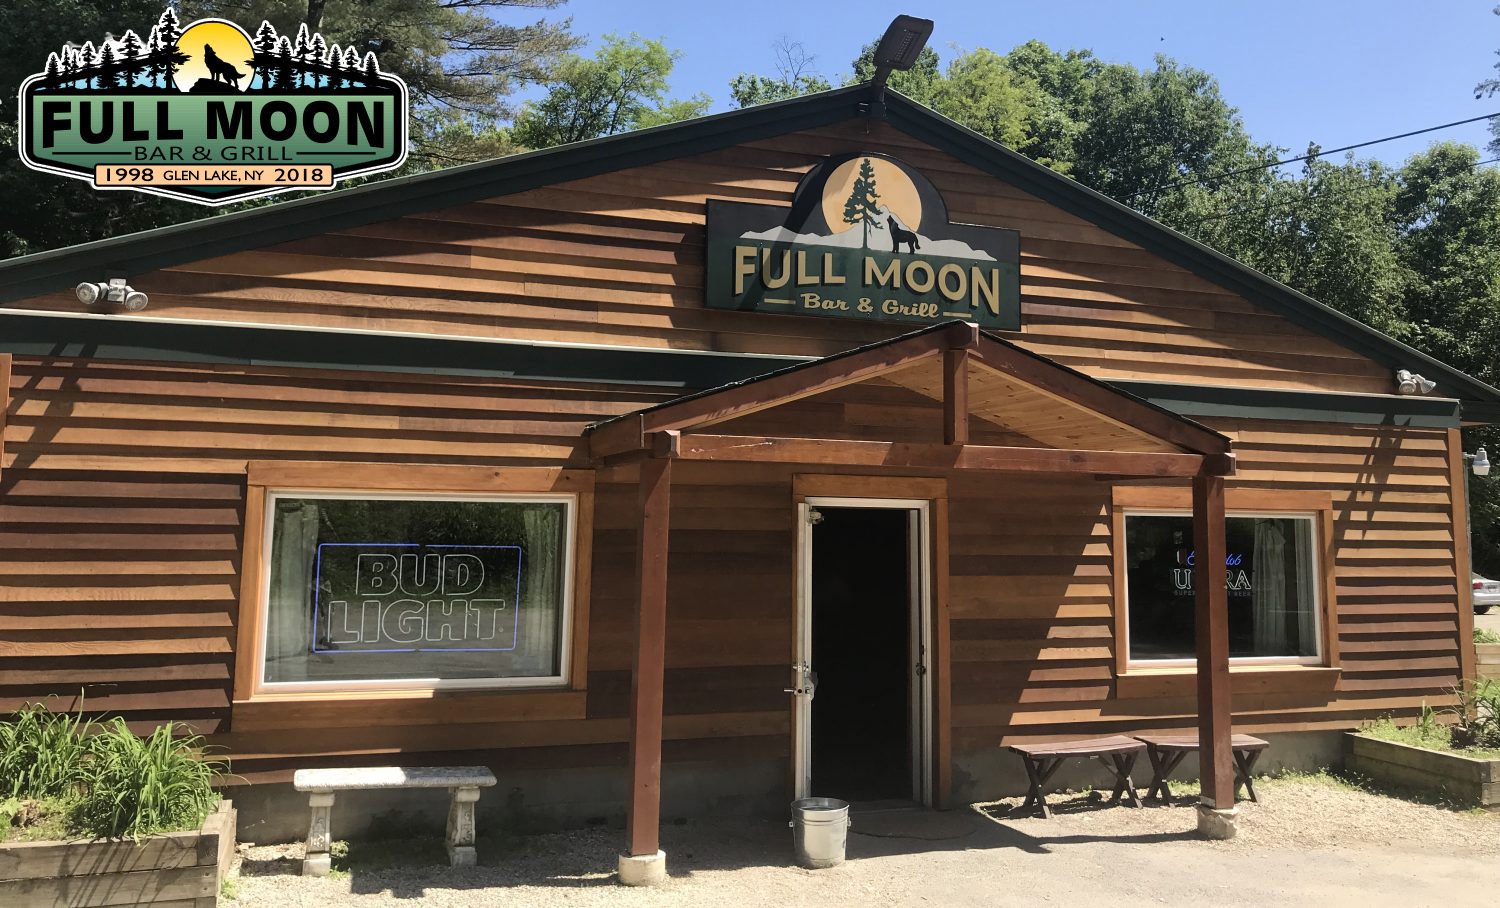 The Full Moon Bar and Grill